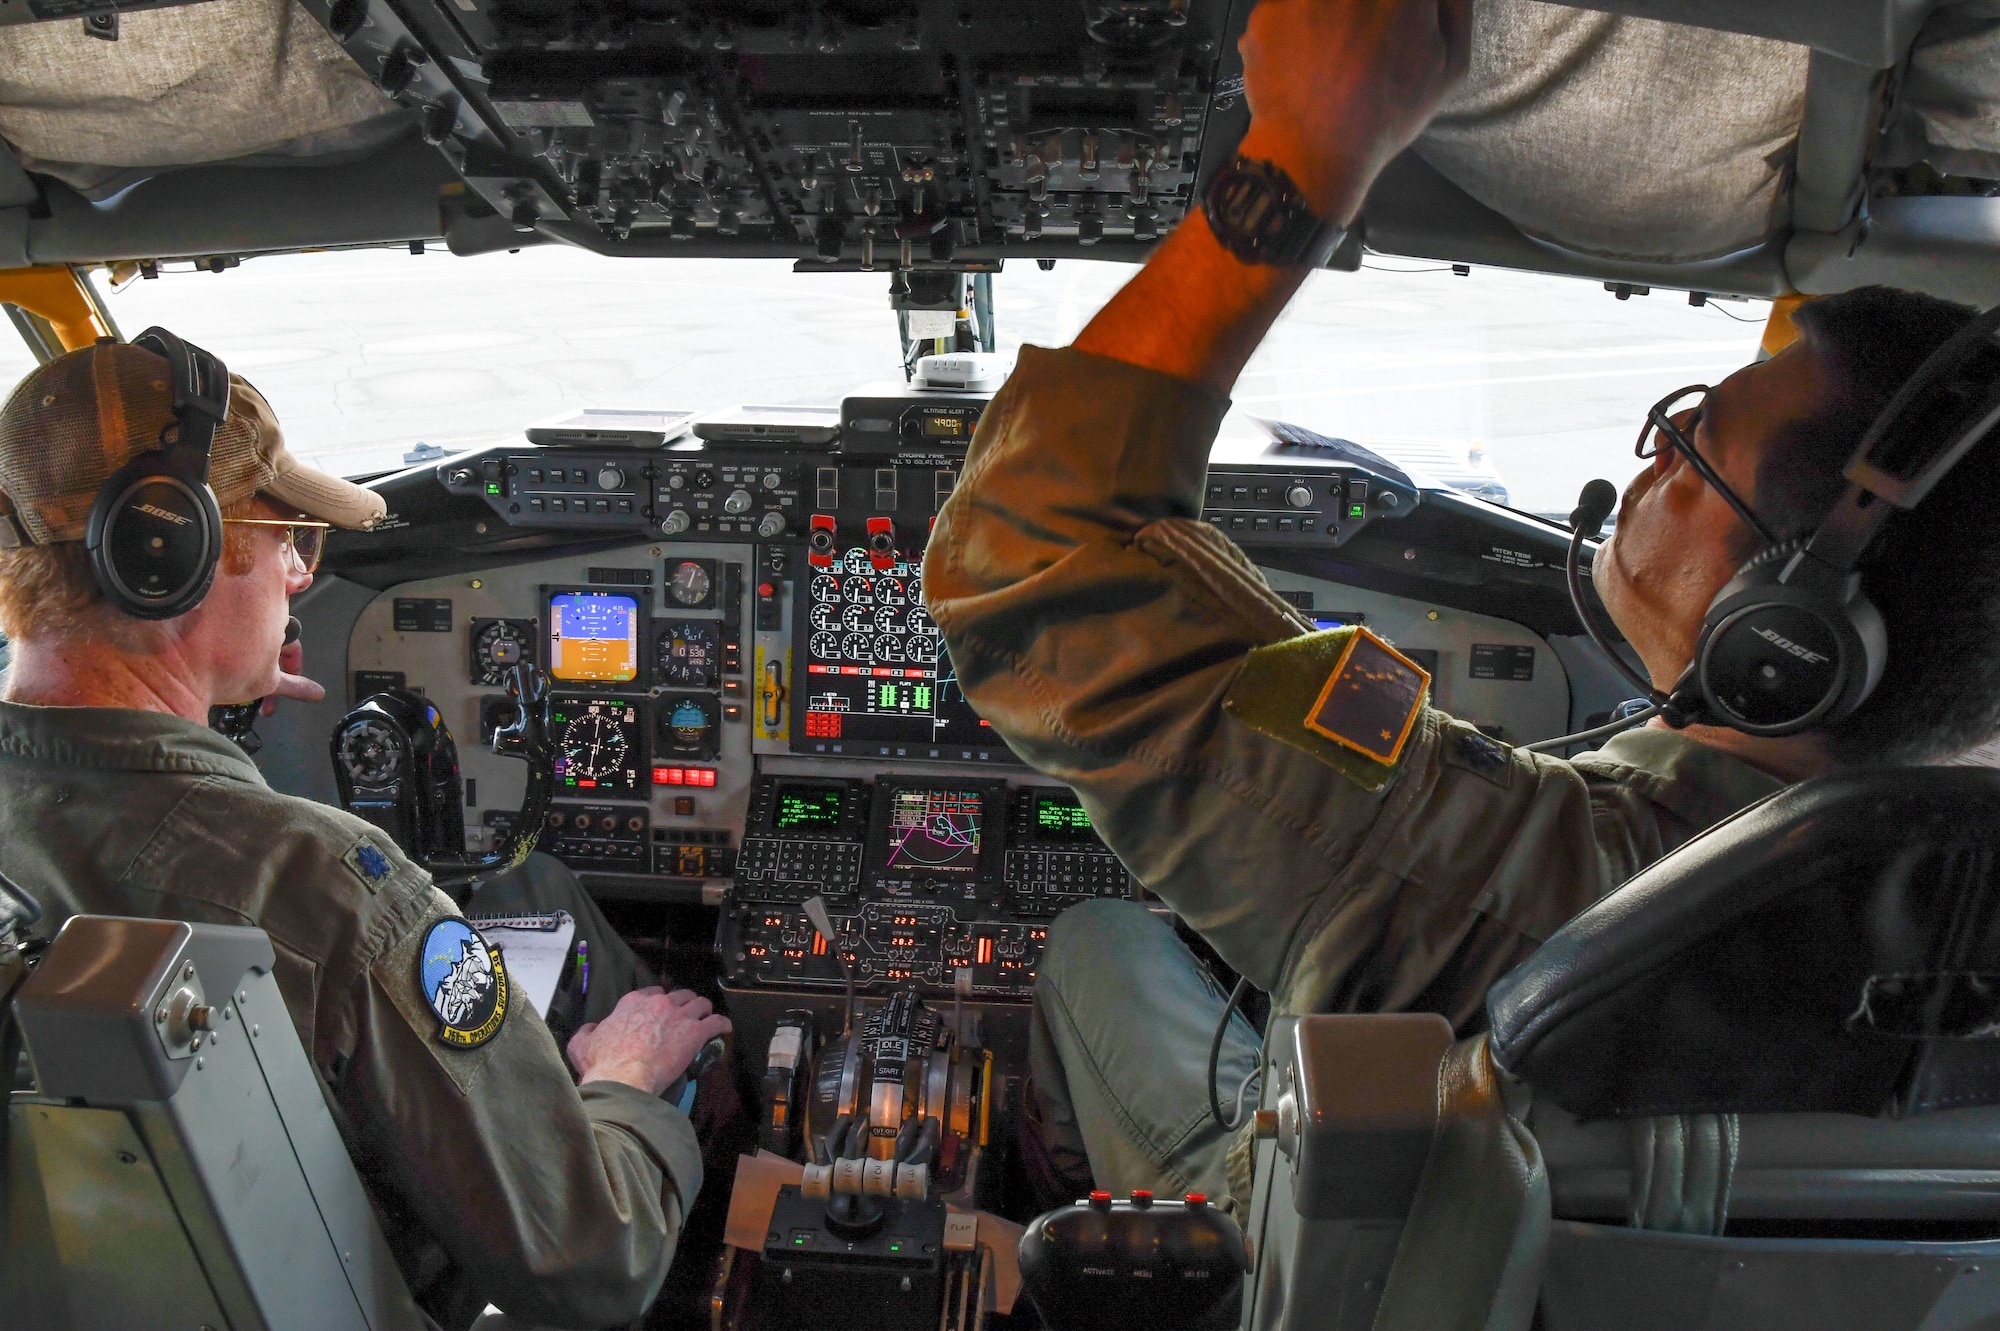 Lt. Col. Rick Wals, 168th Wing Operations Support Squadron commander, and KC-135 pilot and Lt. Col. Joseph Howard, 168th Wing KC-135 Stratotanker pilot, prepare to take off for an aerial refueling mission on board a 168th Wing KC-135 Stratotanker during Red Flag Alaska 23-2. Members of the 168th Wing and the Republic of Korea Air Force visited together during RF-A 23-2 to exchange tactics and procedures while increasing interoperability on the aerial refueling mission. The multinational exercise allows Air Forces from different countries to integrate and is a testament to the collaborative spirit and shared commitment to maintaining peace and security. The 168th WG and international counterparts provided air power through the aerial refueling mission during RF-A 23-2. Aerial refueling increases combat aircraft’s speed, range, lethality, and versatility. (U.S. Air National Guard photo by Senior Master Sgt. Julie Avey)